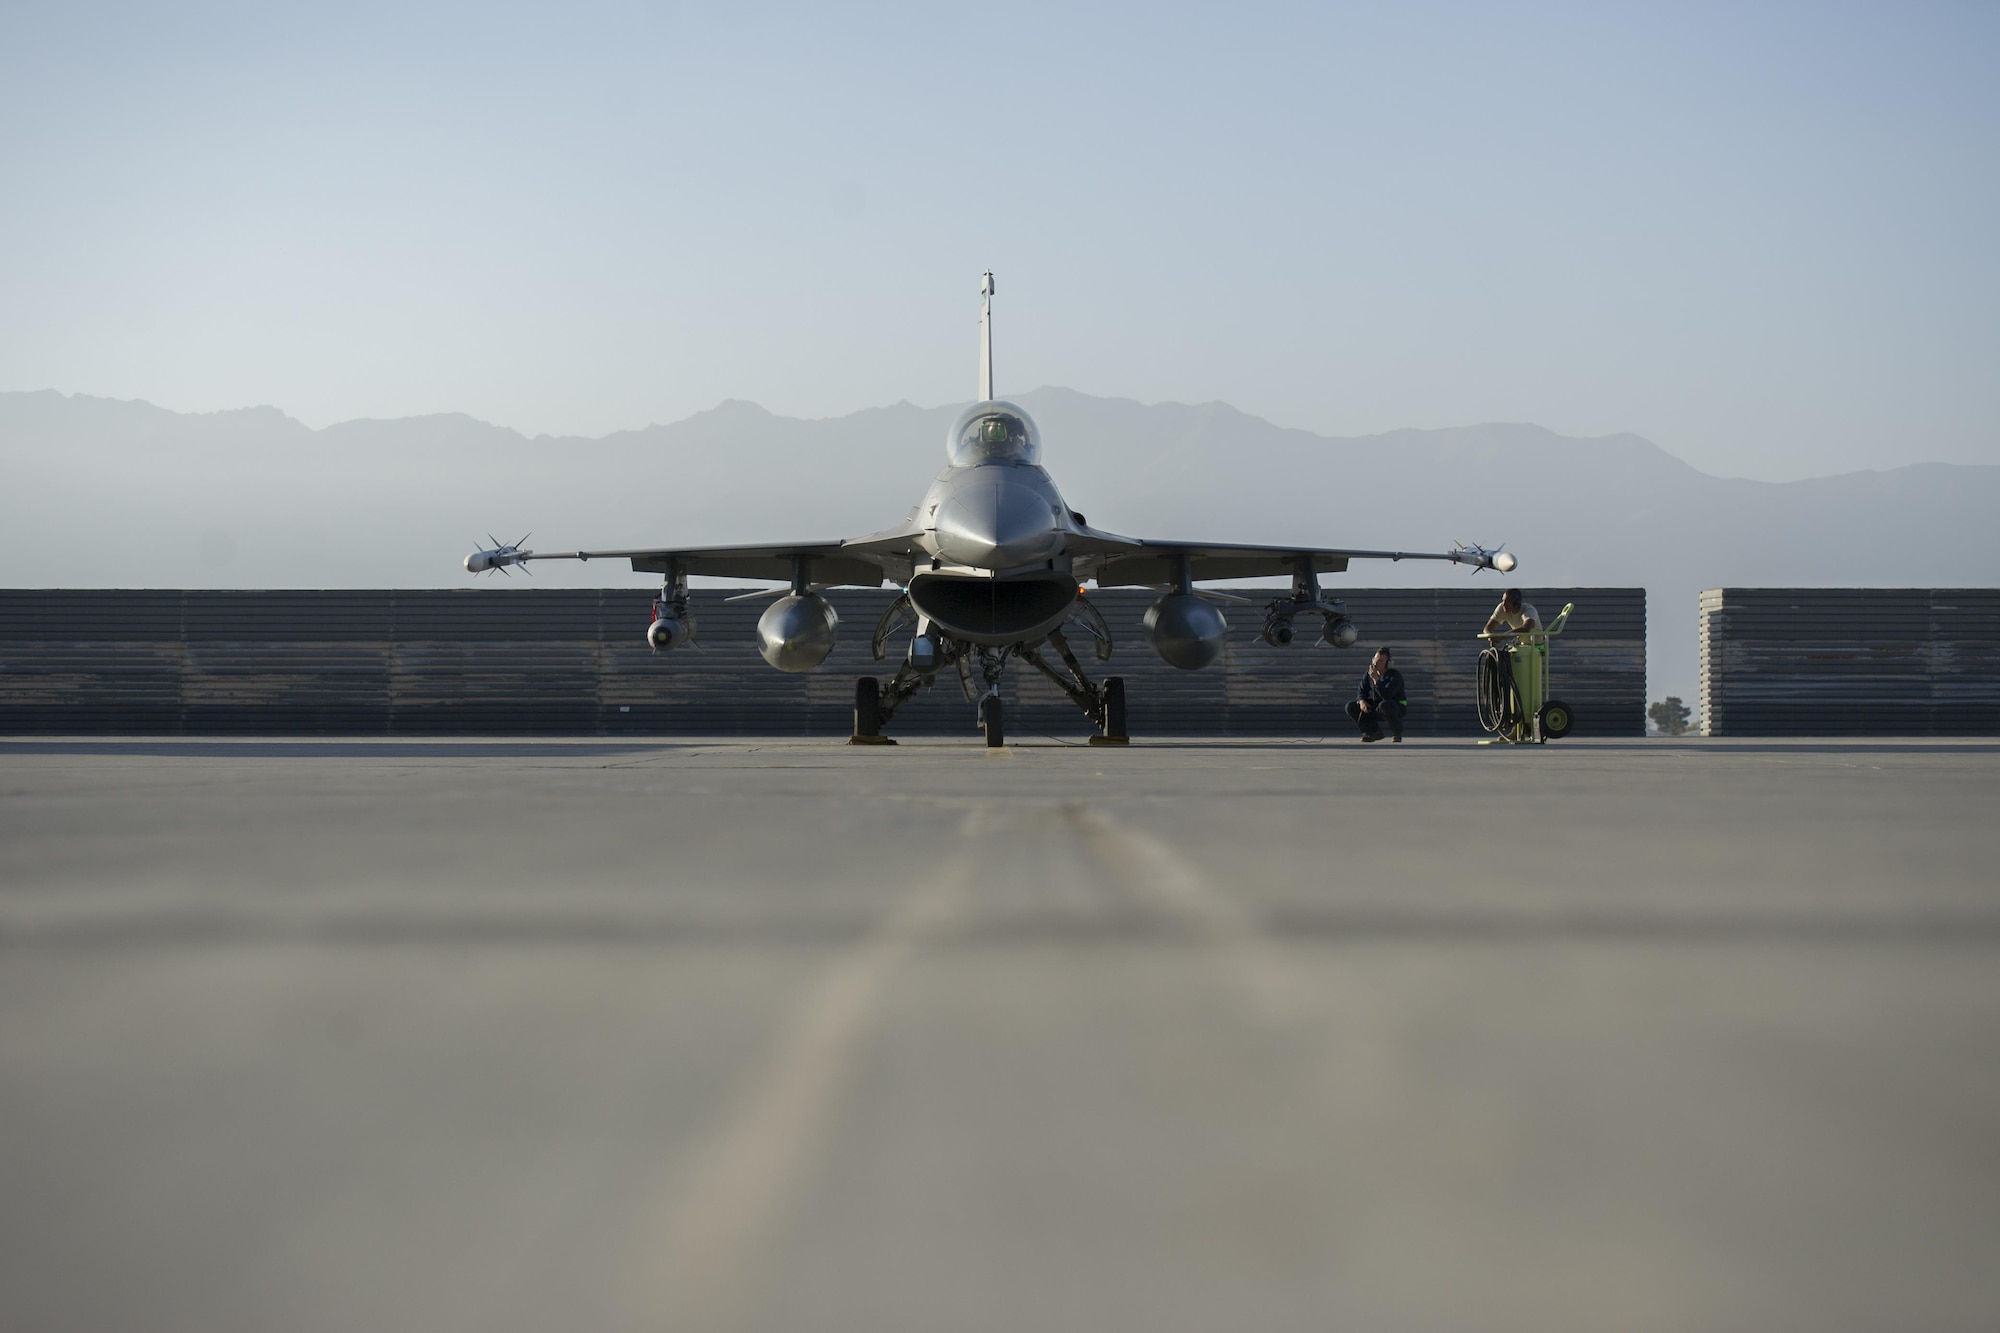 An F-16 Fighting Falcon piloted by Lt. Col. Michael Meyer, 421st Expeditionary Fighter Squadron commander, prepares to depart for a sortie at Bagram Airfield, Afghanistan, Oct. 30, 2015. Airmen assigned to the 421st FS, known as the “Black Widows,” from Hill Air Force Base, Utah, arrived at Bagram Airfield, Afghanistan Oct. 28, 2015 in support of Operation Freedom’s Sentinel and NATO’s Resolute Support mission. (U.S. Air Force photo/Tech. Sgt. Robert Cloys/Released)